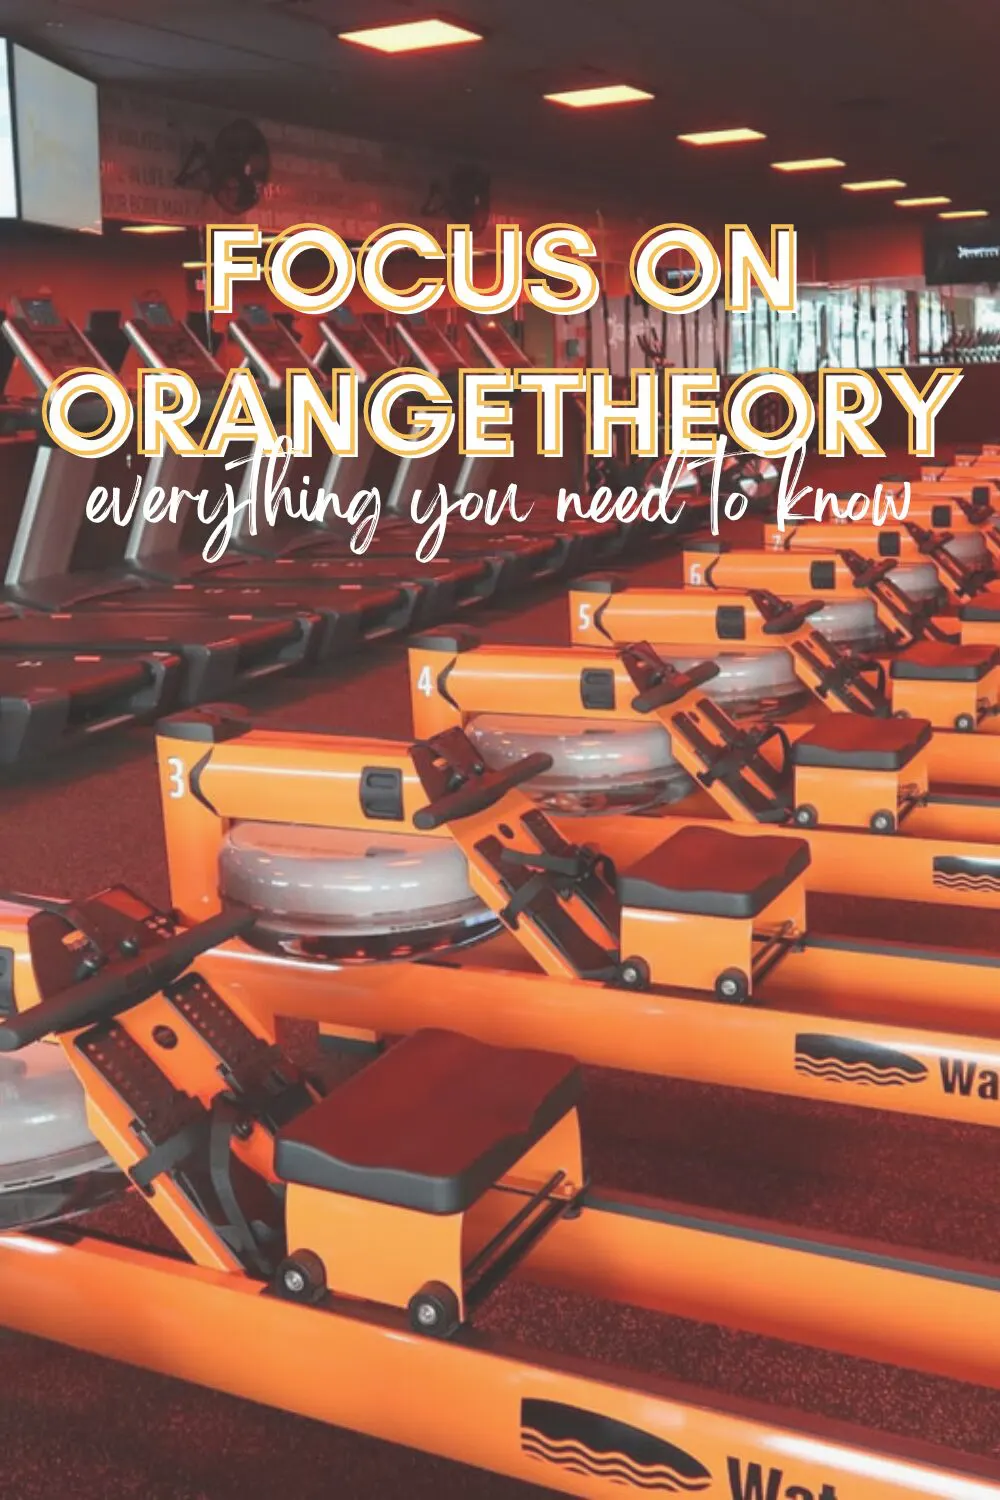 Orangetheory Fitness offering a free class this weekend